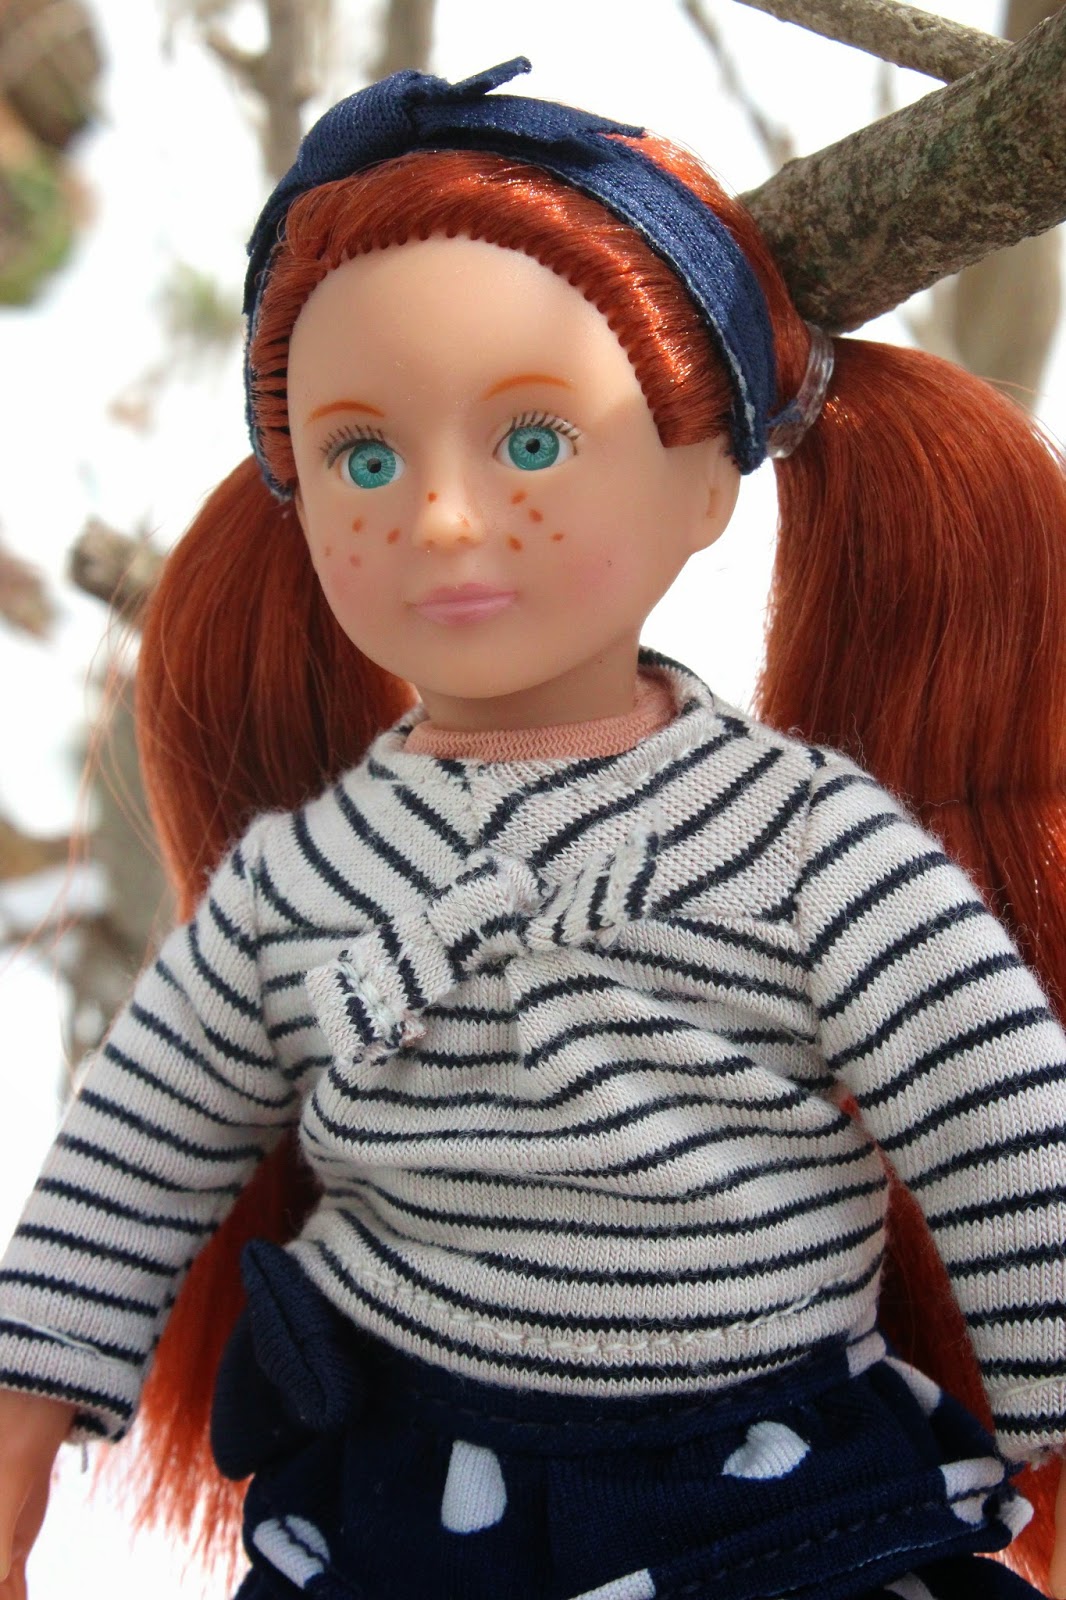 PLANET OF THE DOLLS: Review of Our Generation Mini Kendra 